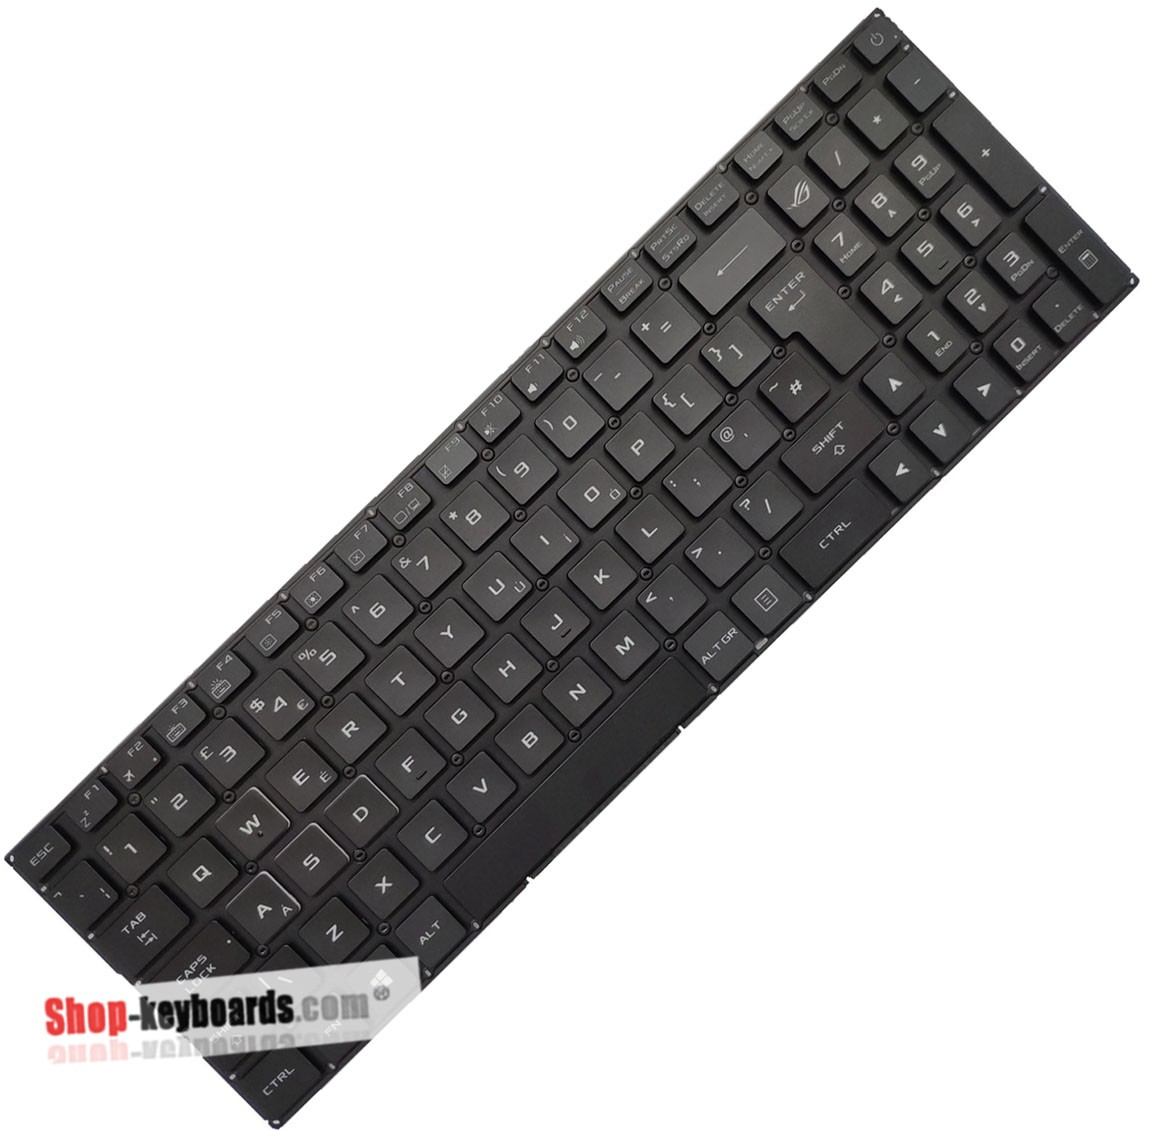 Asus 0KNB0-6618SF00  Keyboard replacement